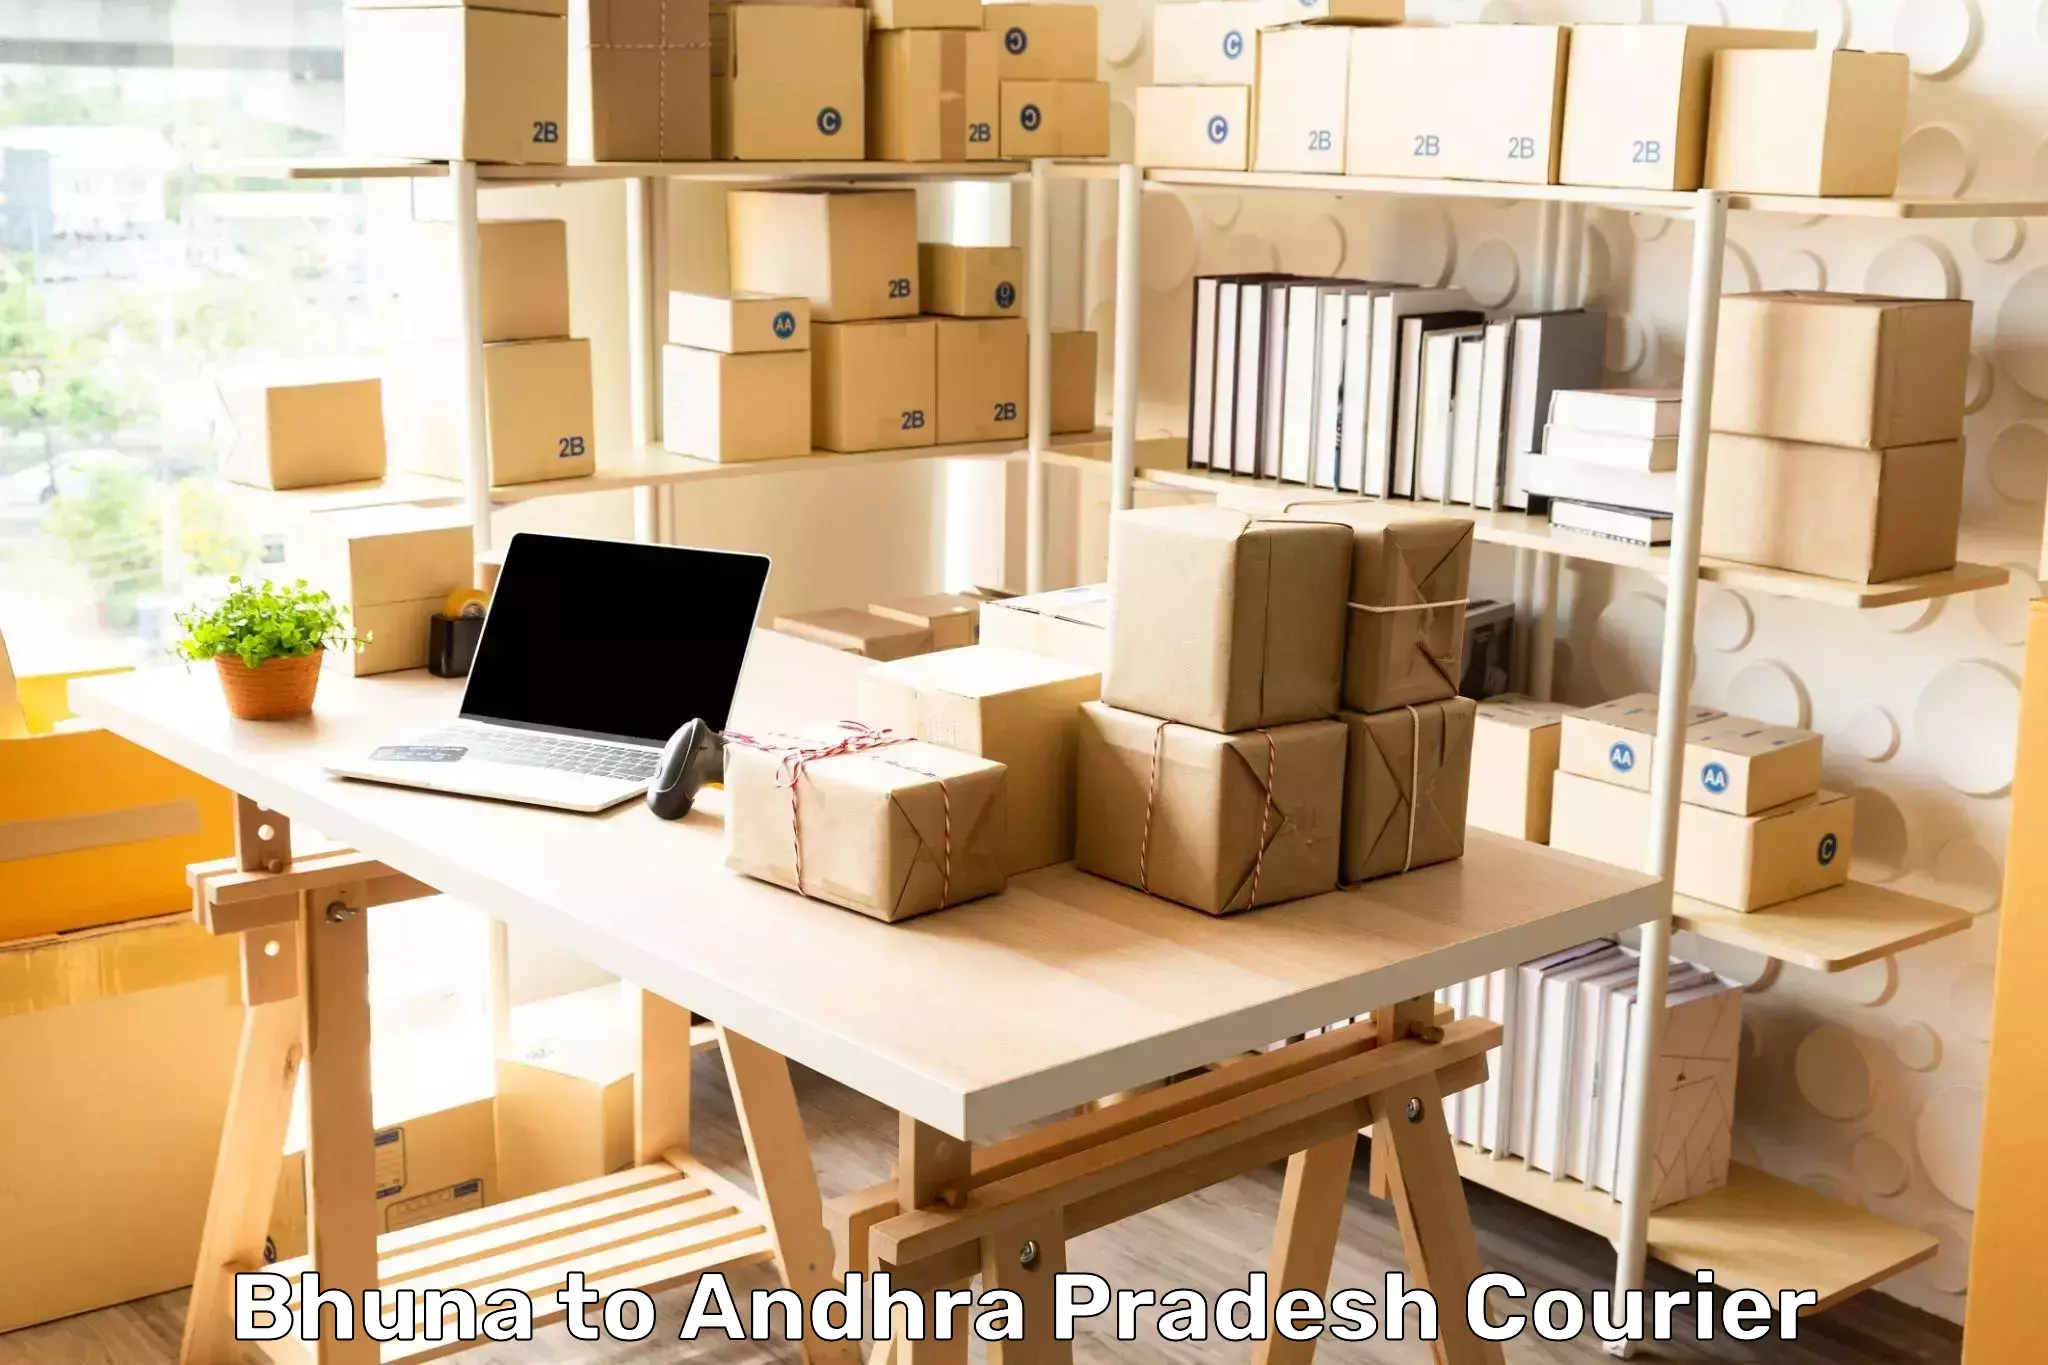 Customizable delivery plans Bhuna to Andhra Pradesh